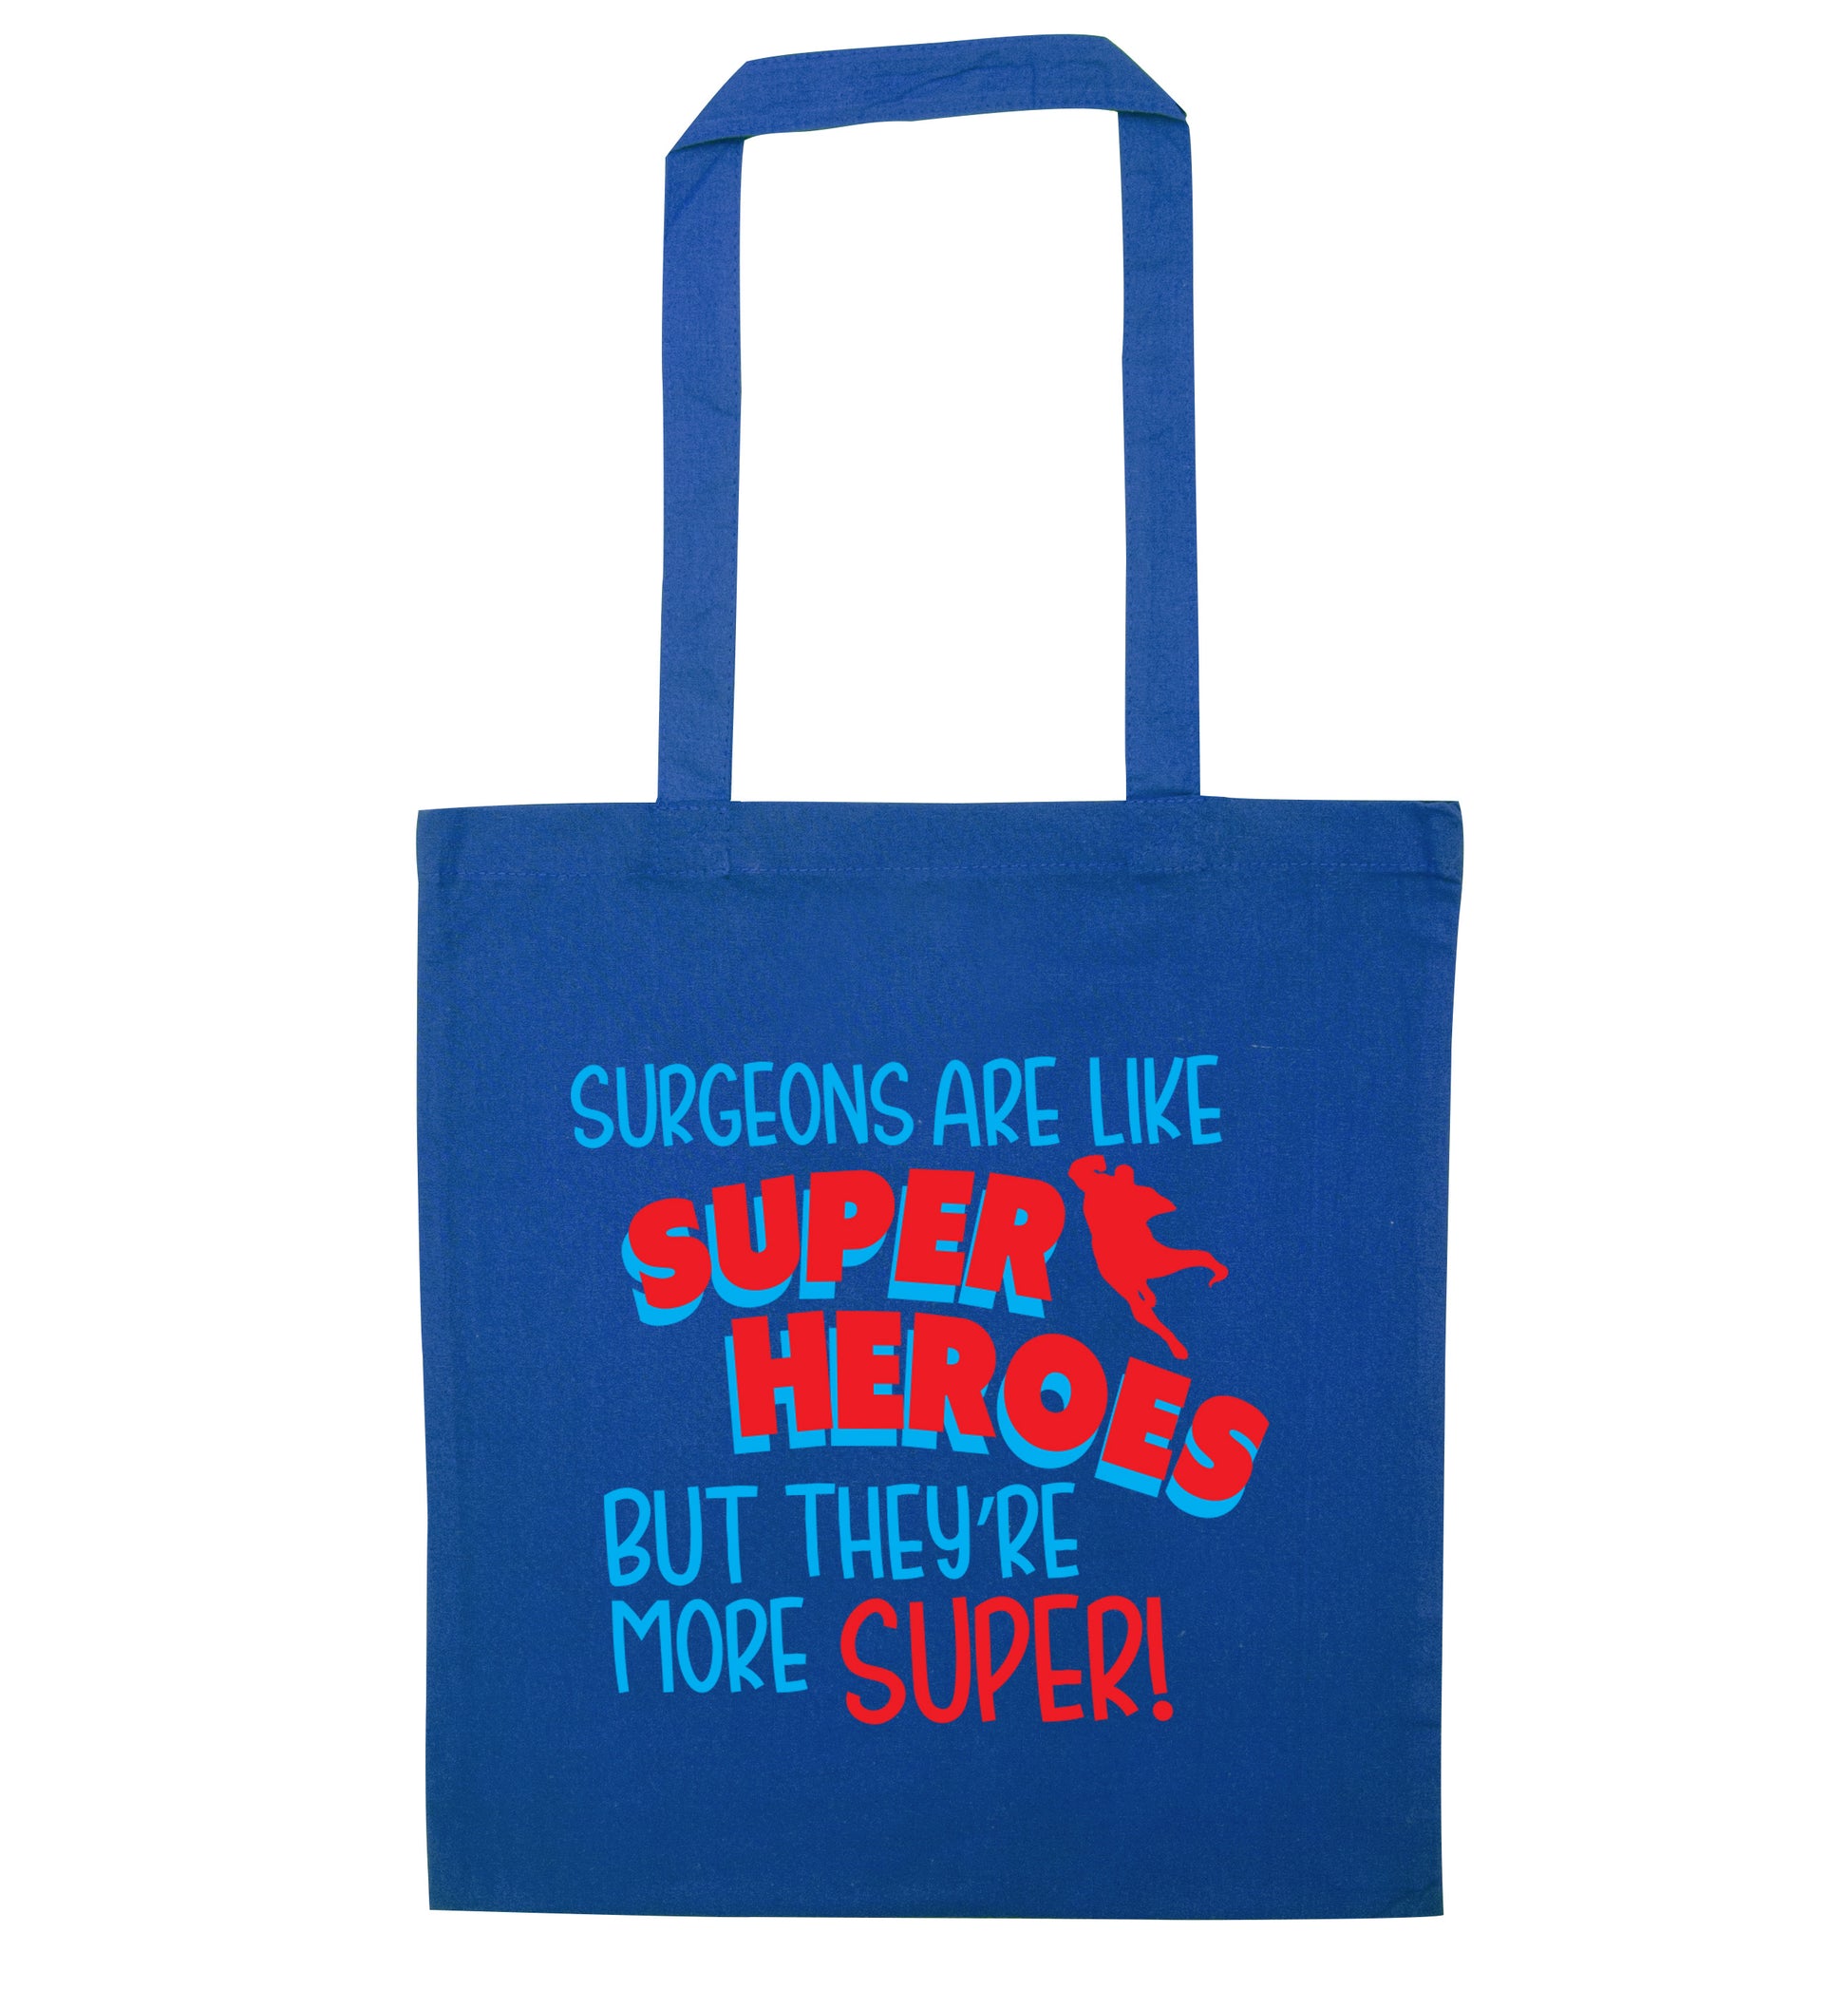 Surgeons are like superheros but they're more super blue tote bag